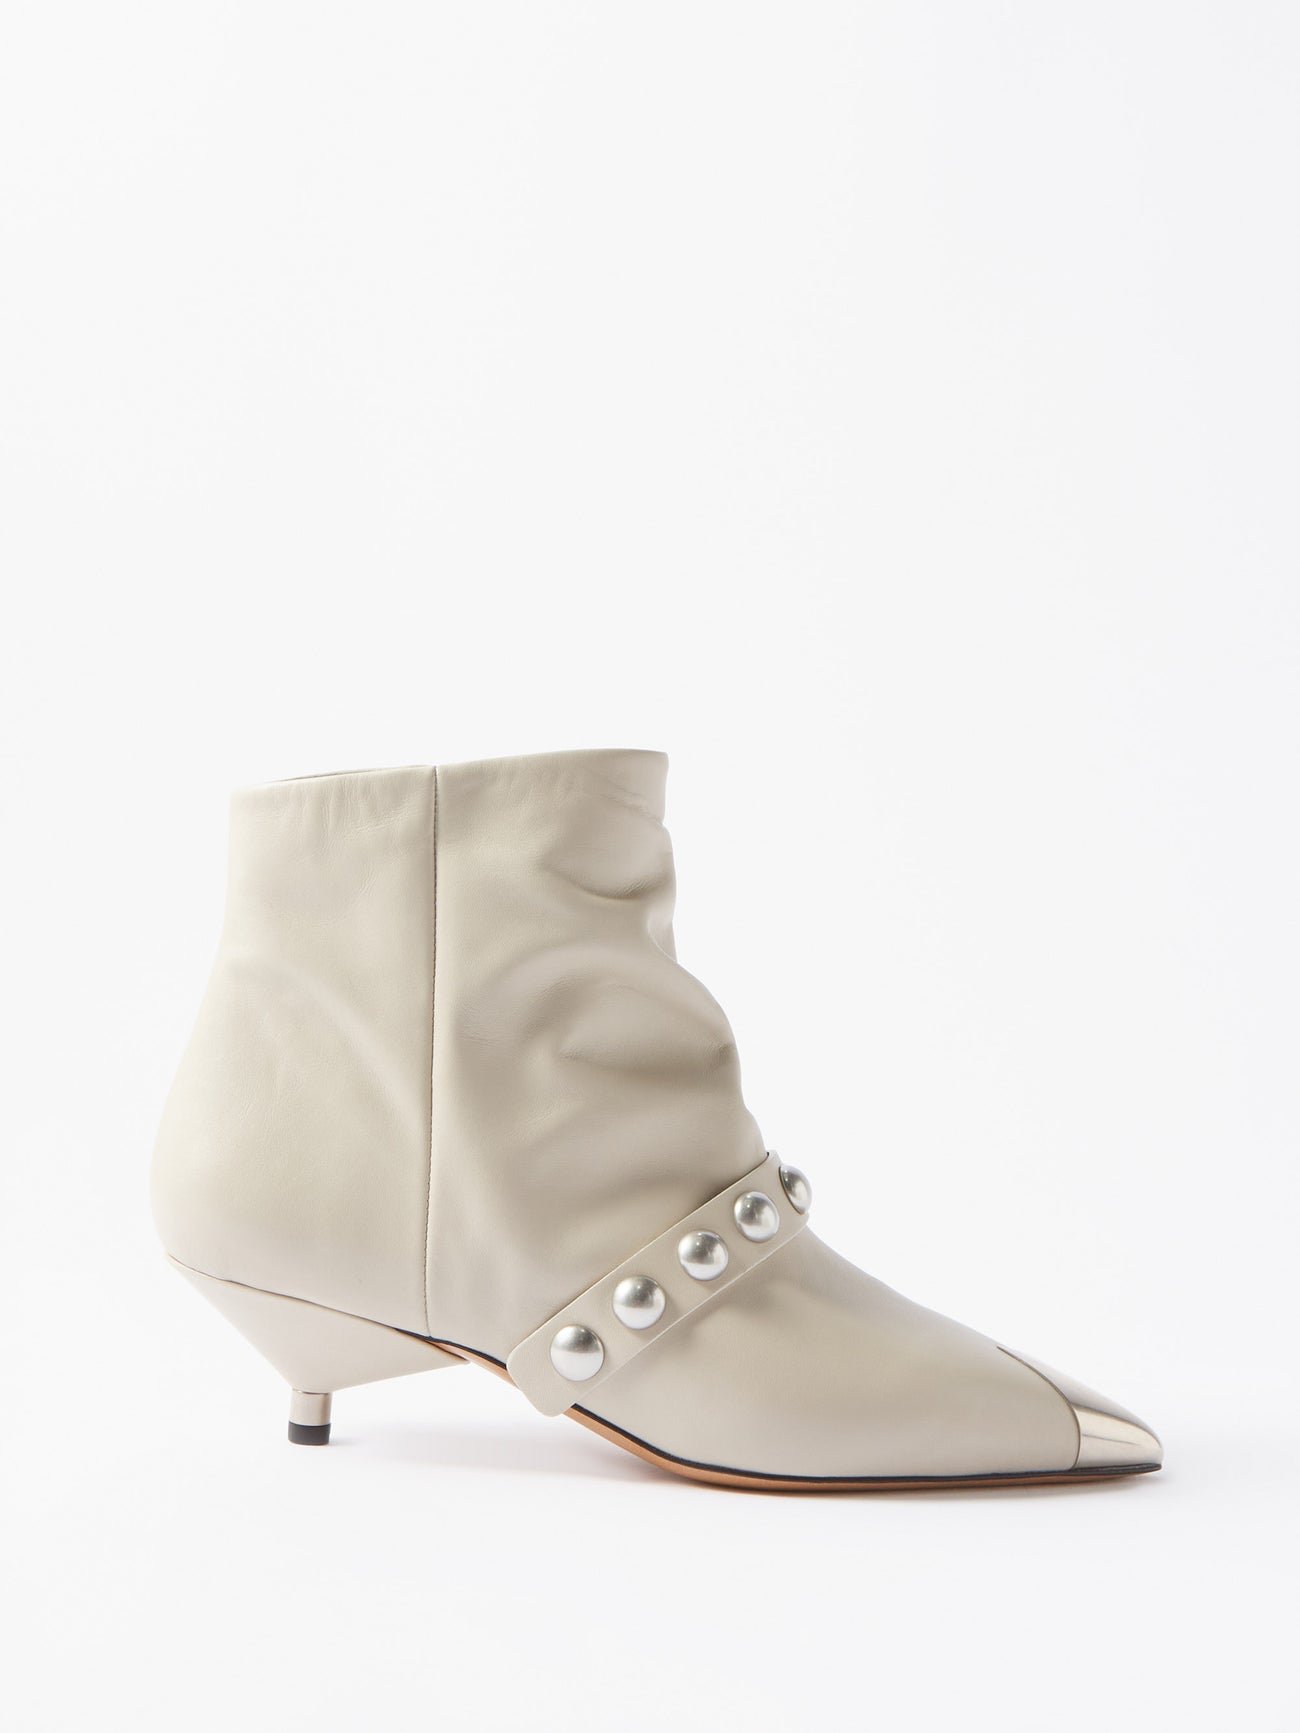 Isabel Marant 'donatee' Leather Ankle Boots in Natural